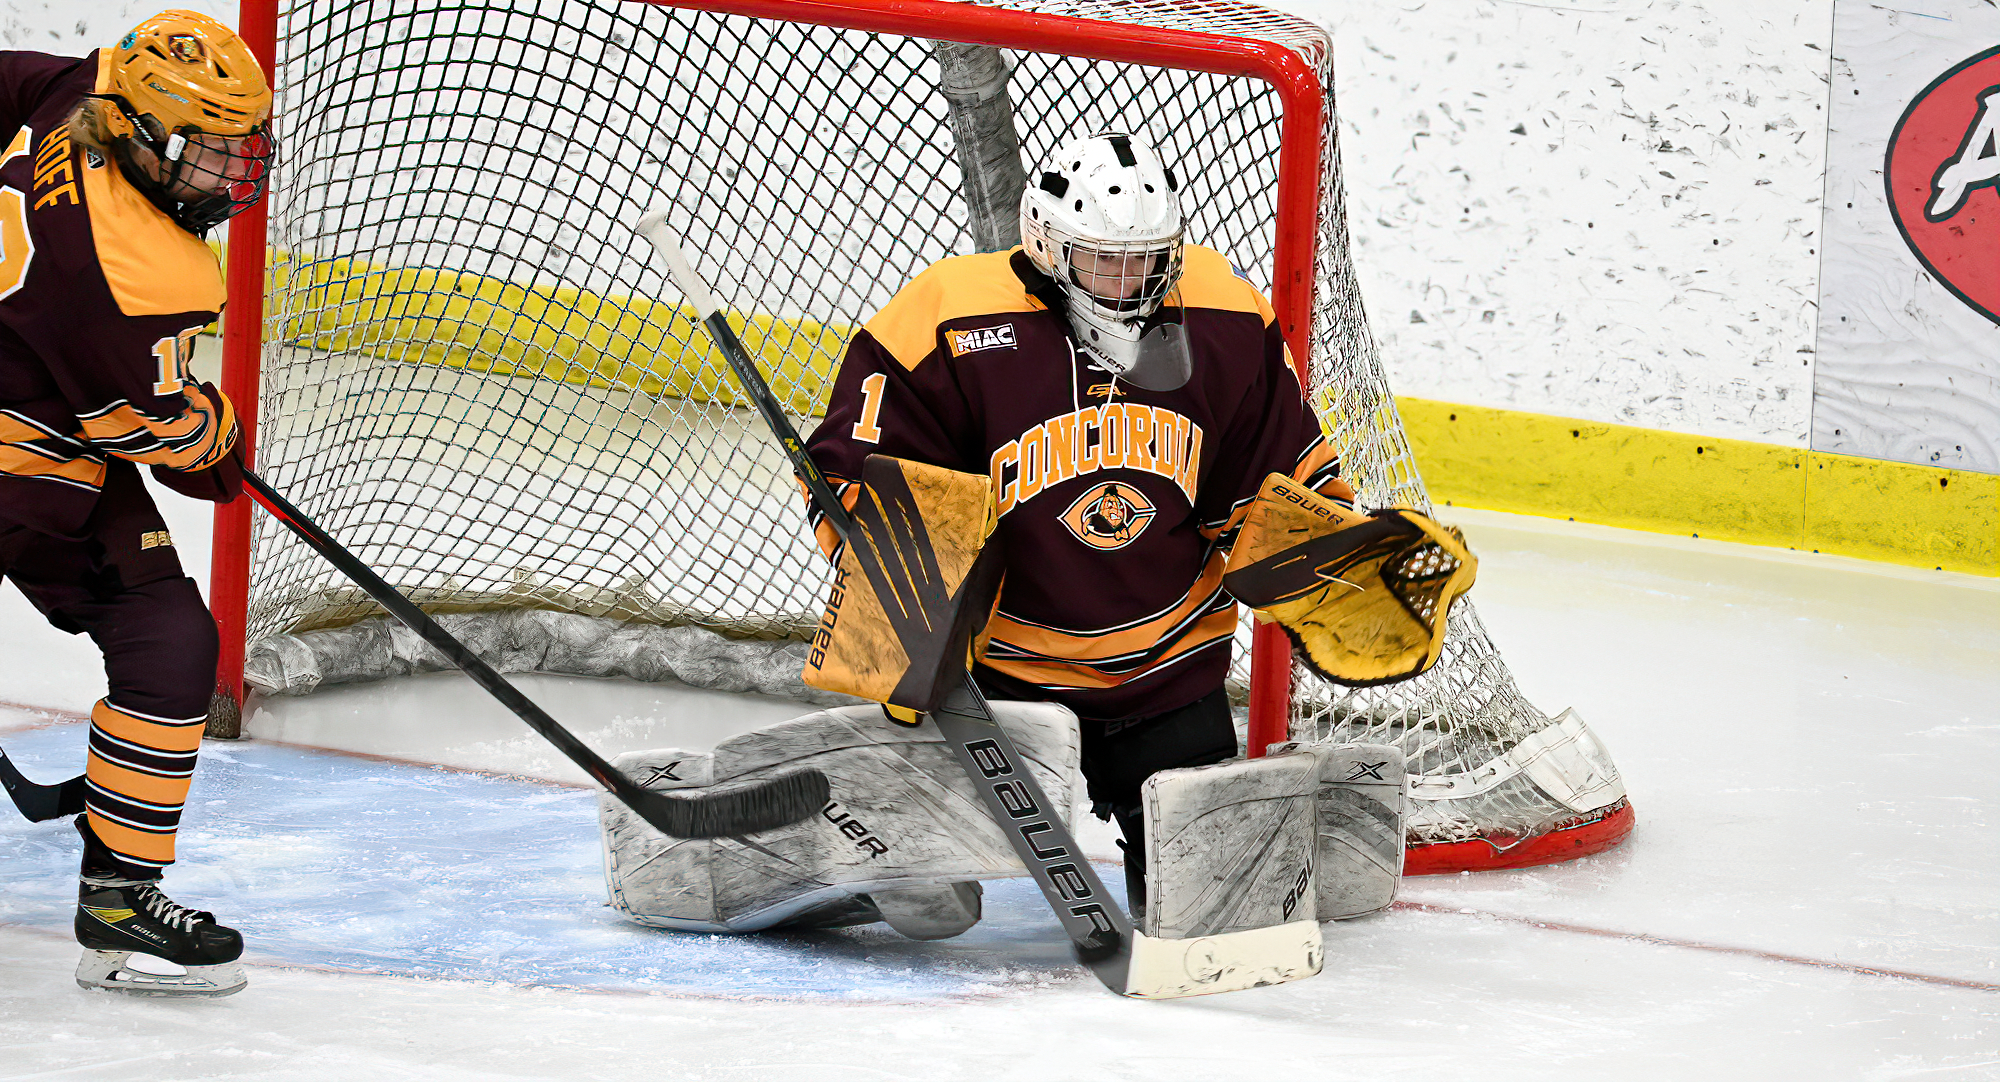 Cobber sophomore goalie Hailee Bailey made a career-high 36 saves in Concordia's series finale at Augsburg.